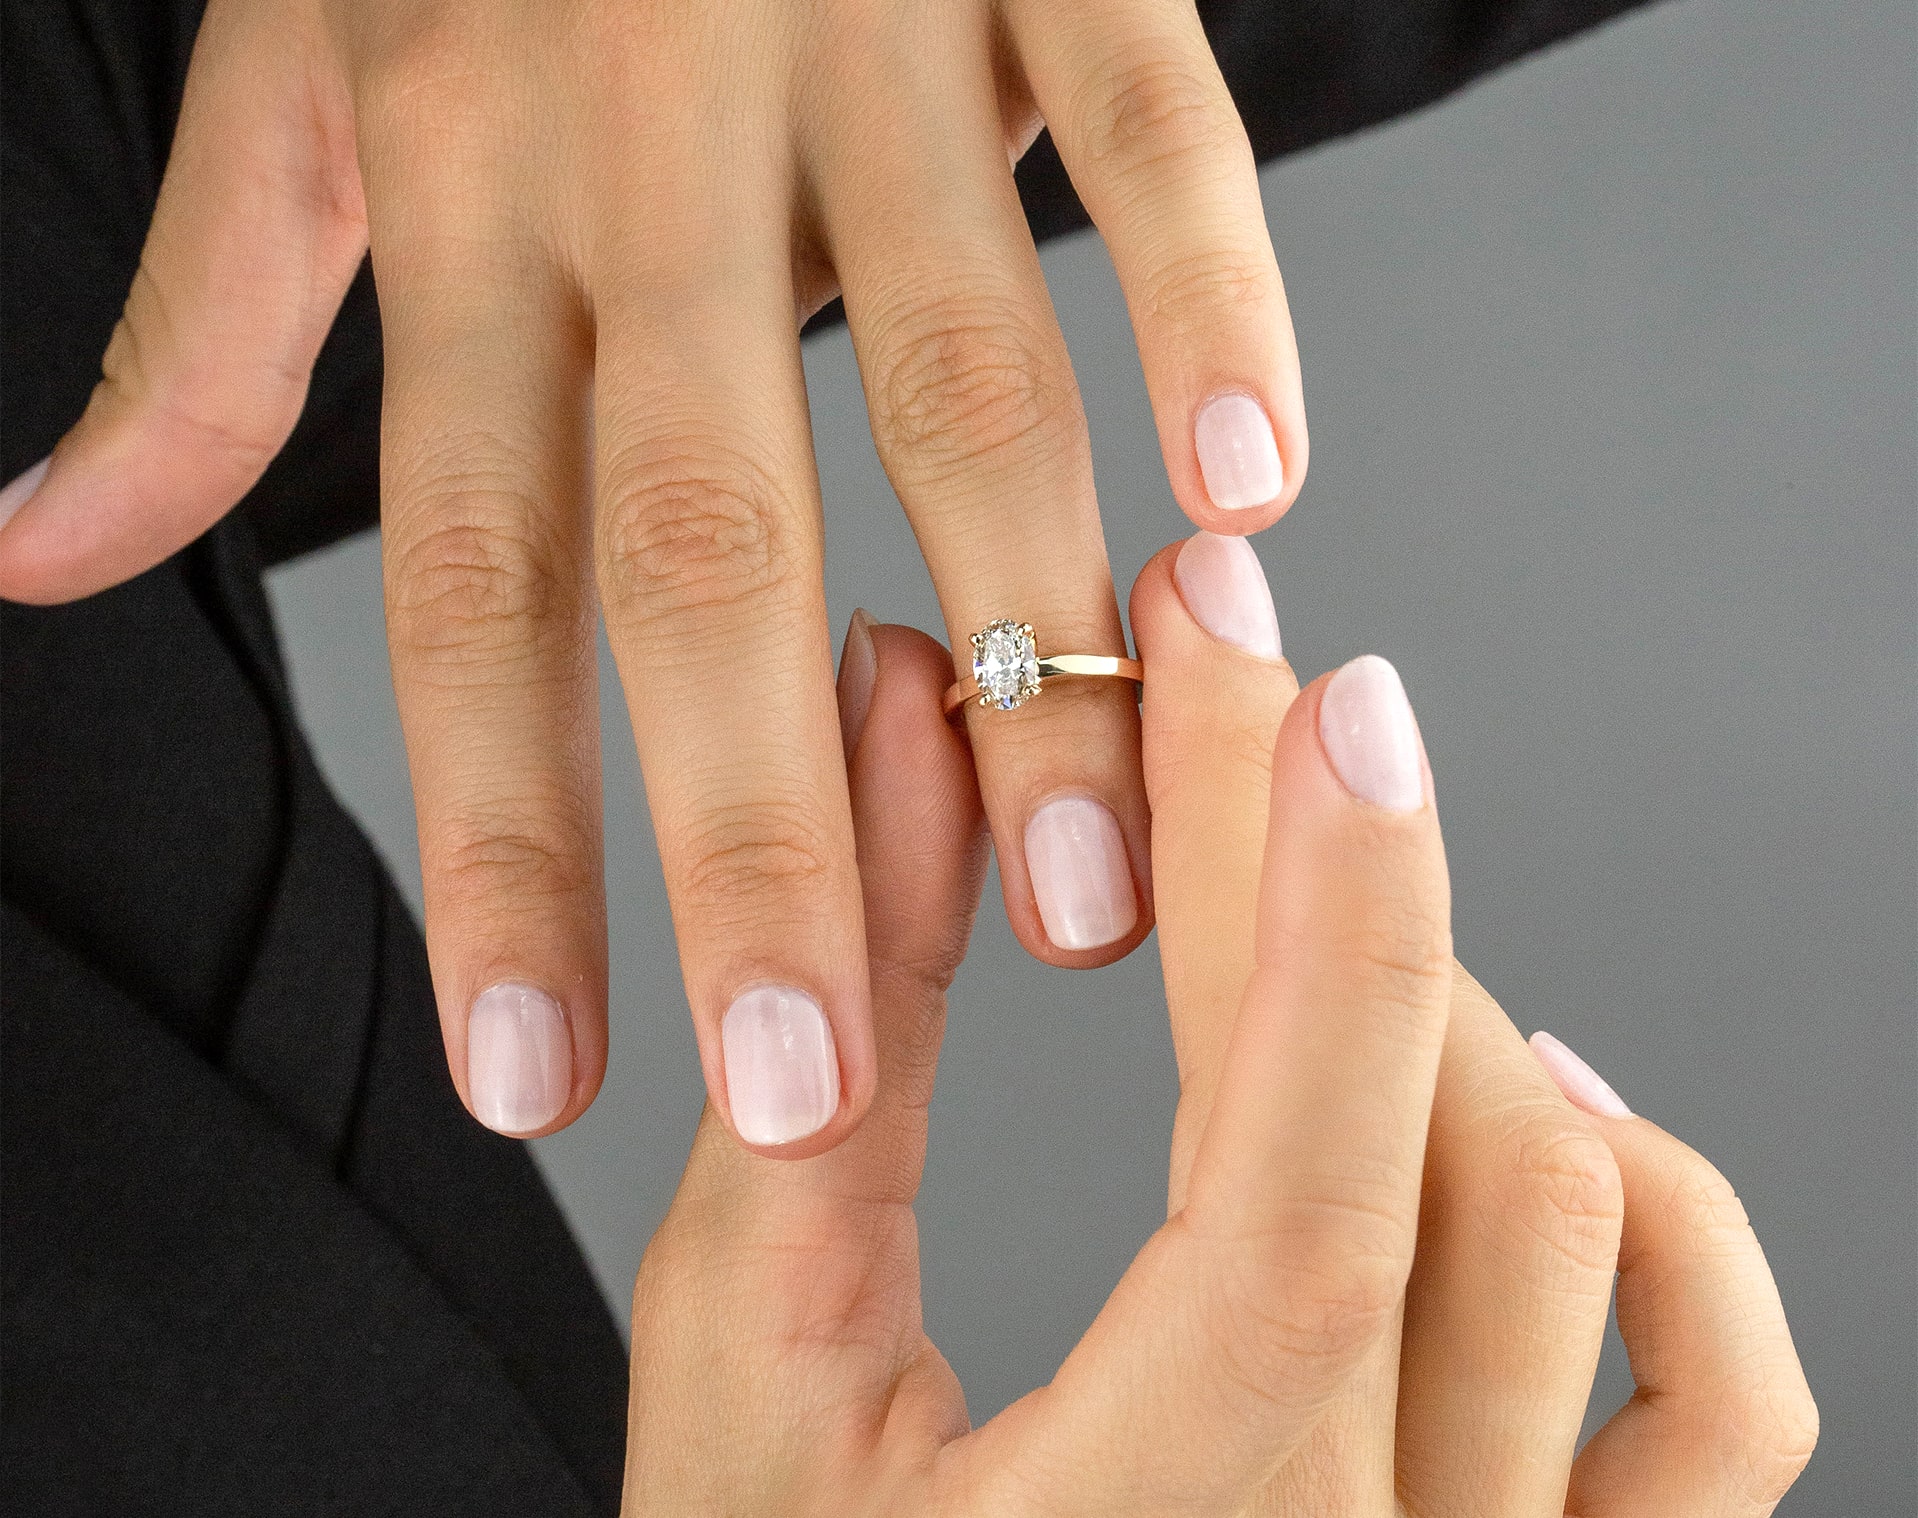 5 Creative Ways To Get Your Partner's Wedding Ring Size